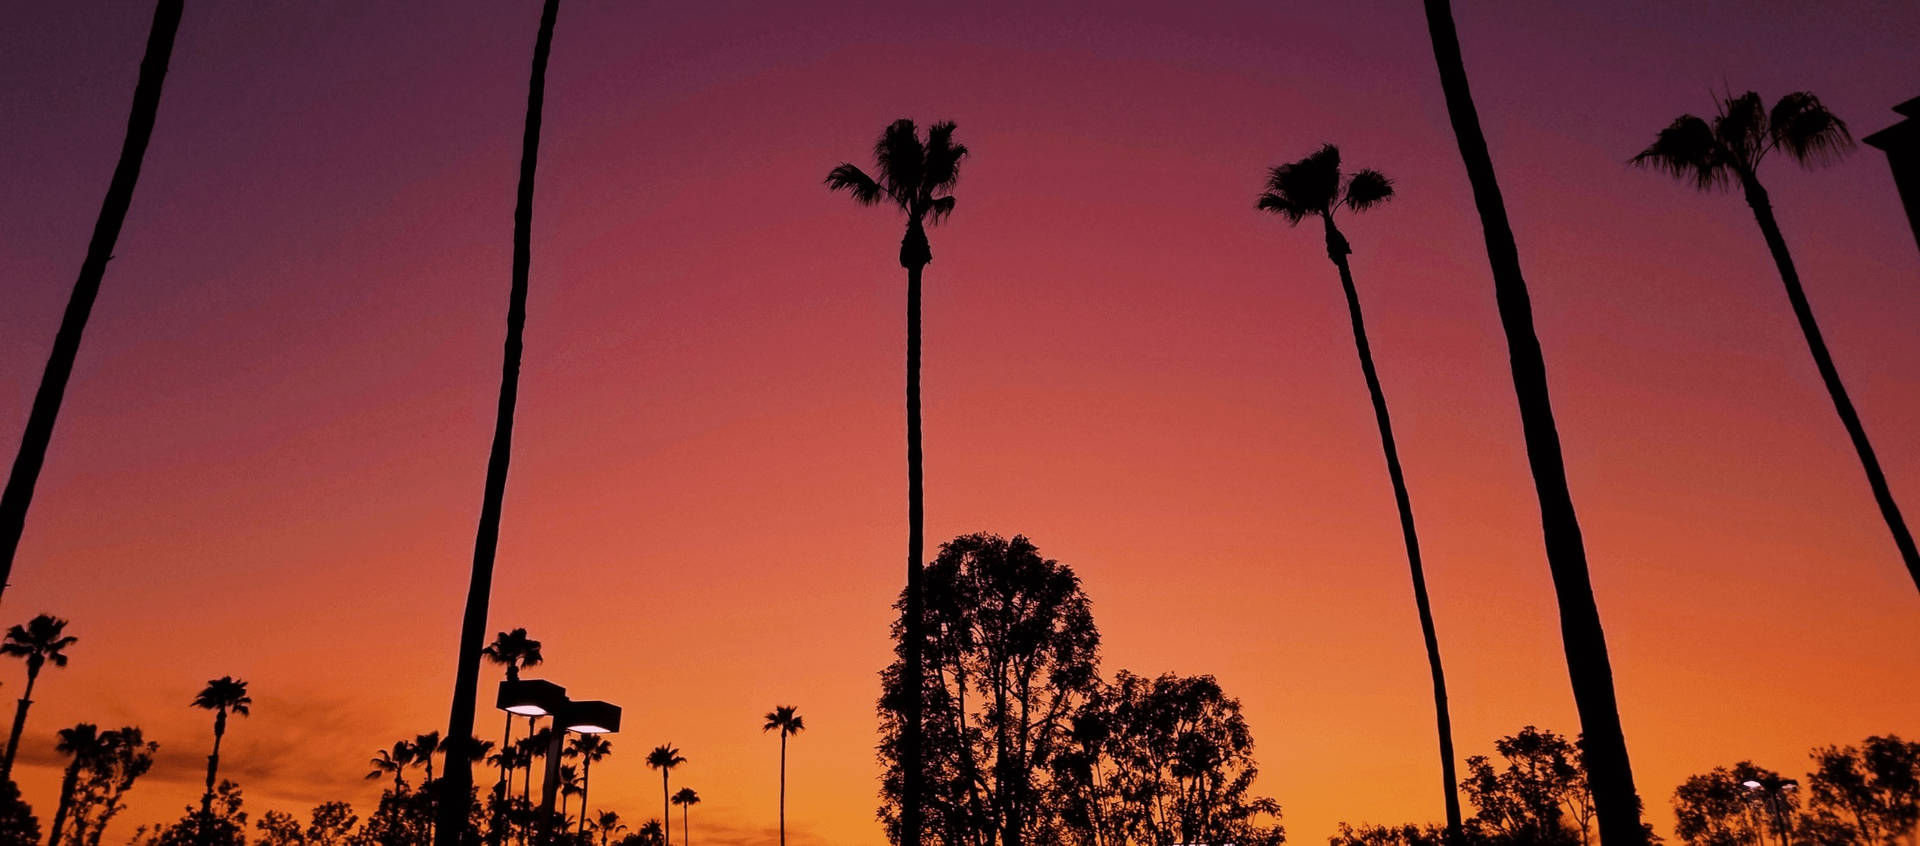 Los Angeles Sunset Over Trees Background